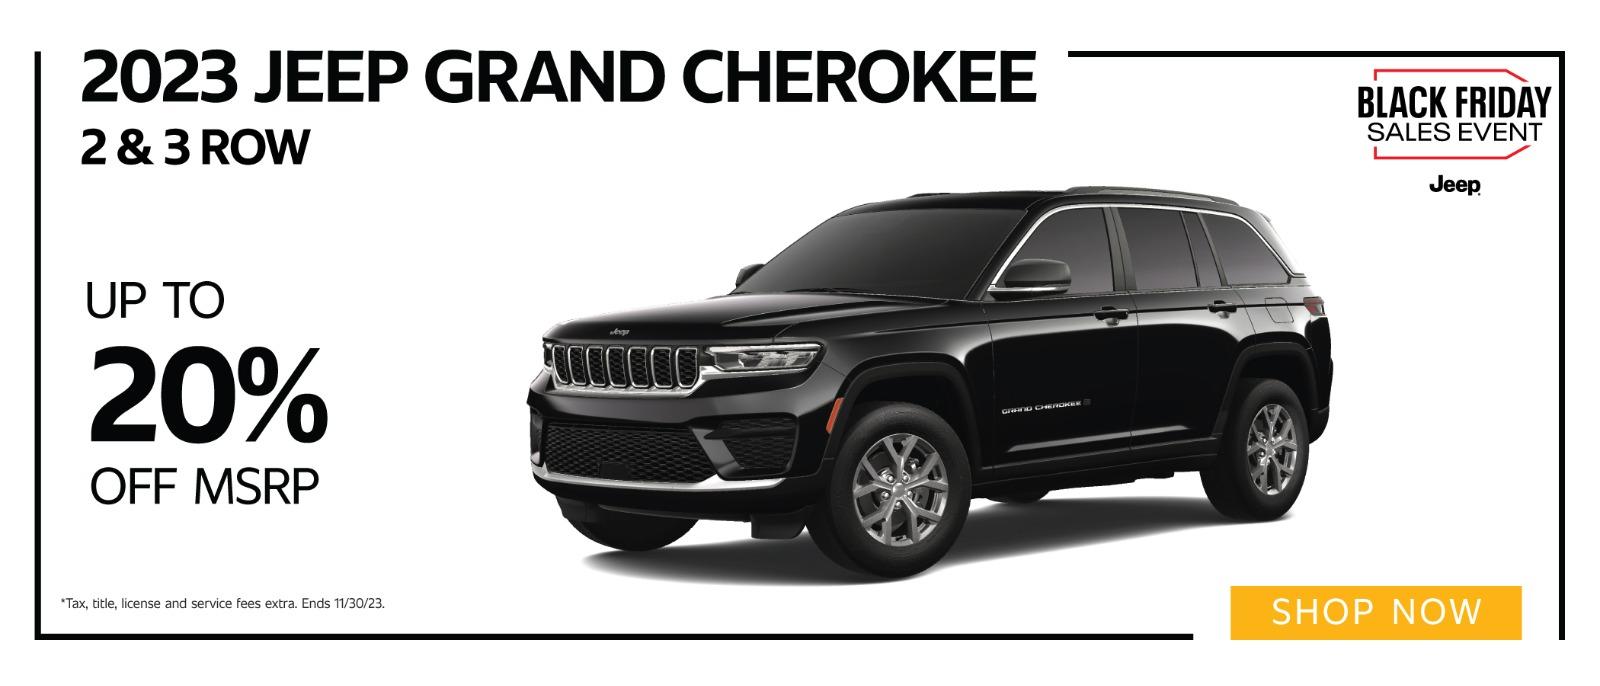 2023Jeep Grand Cherokee up to 20% OFF MSRP